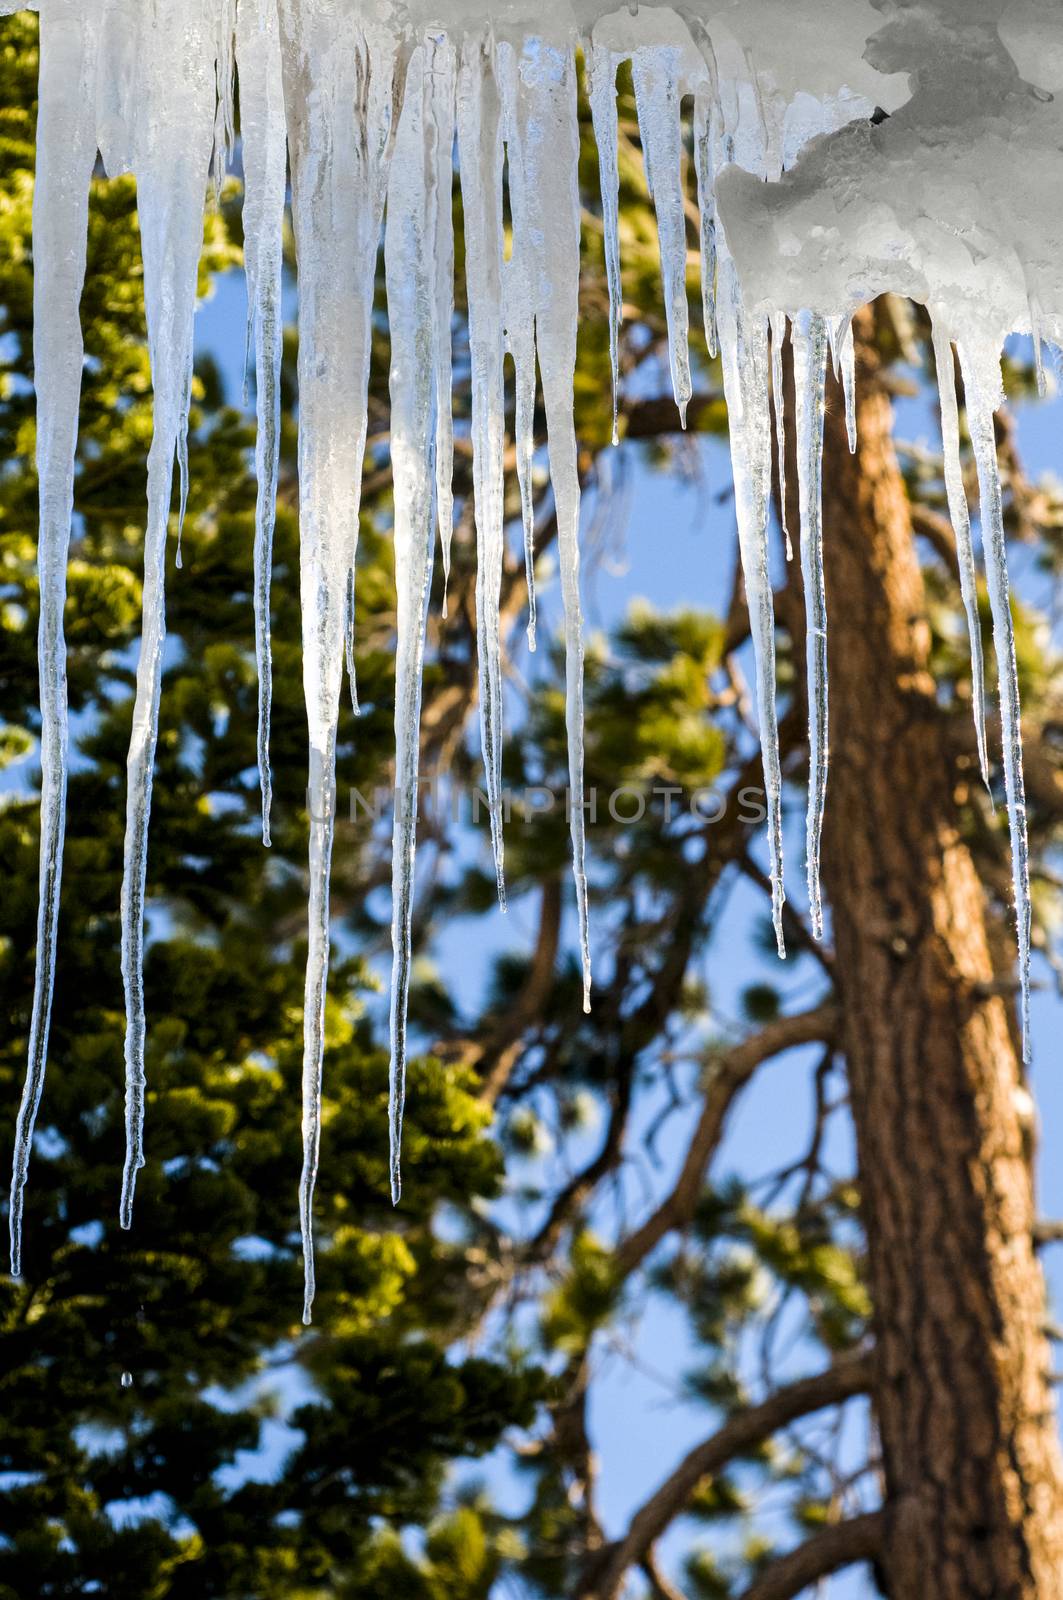 Hanging icicles by Njean